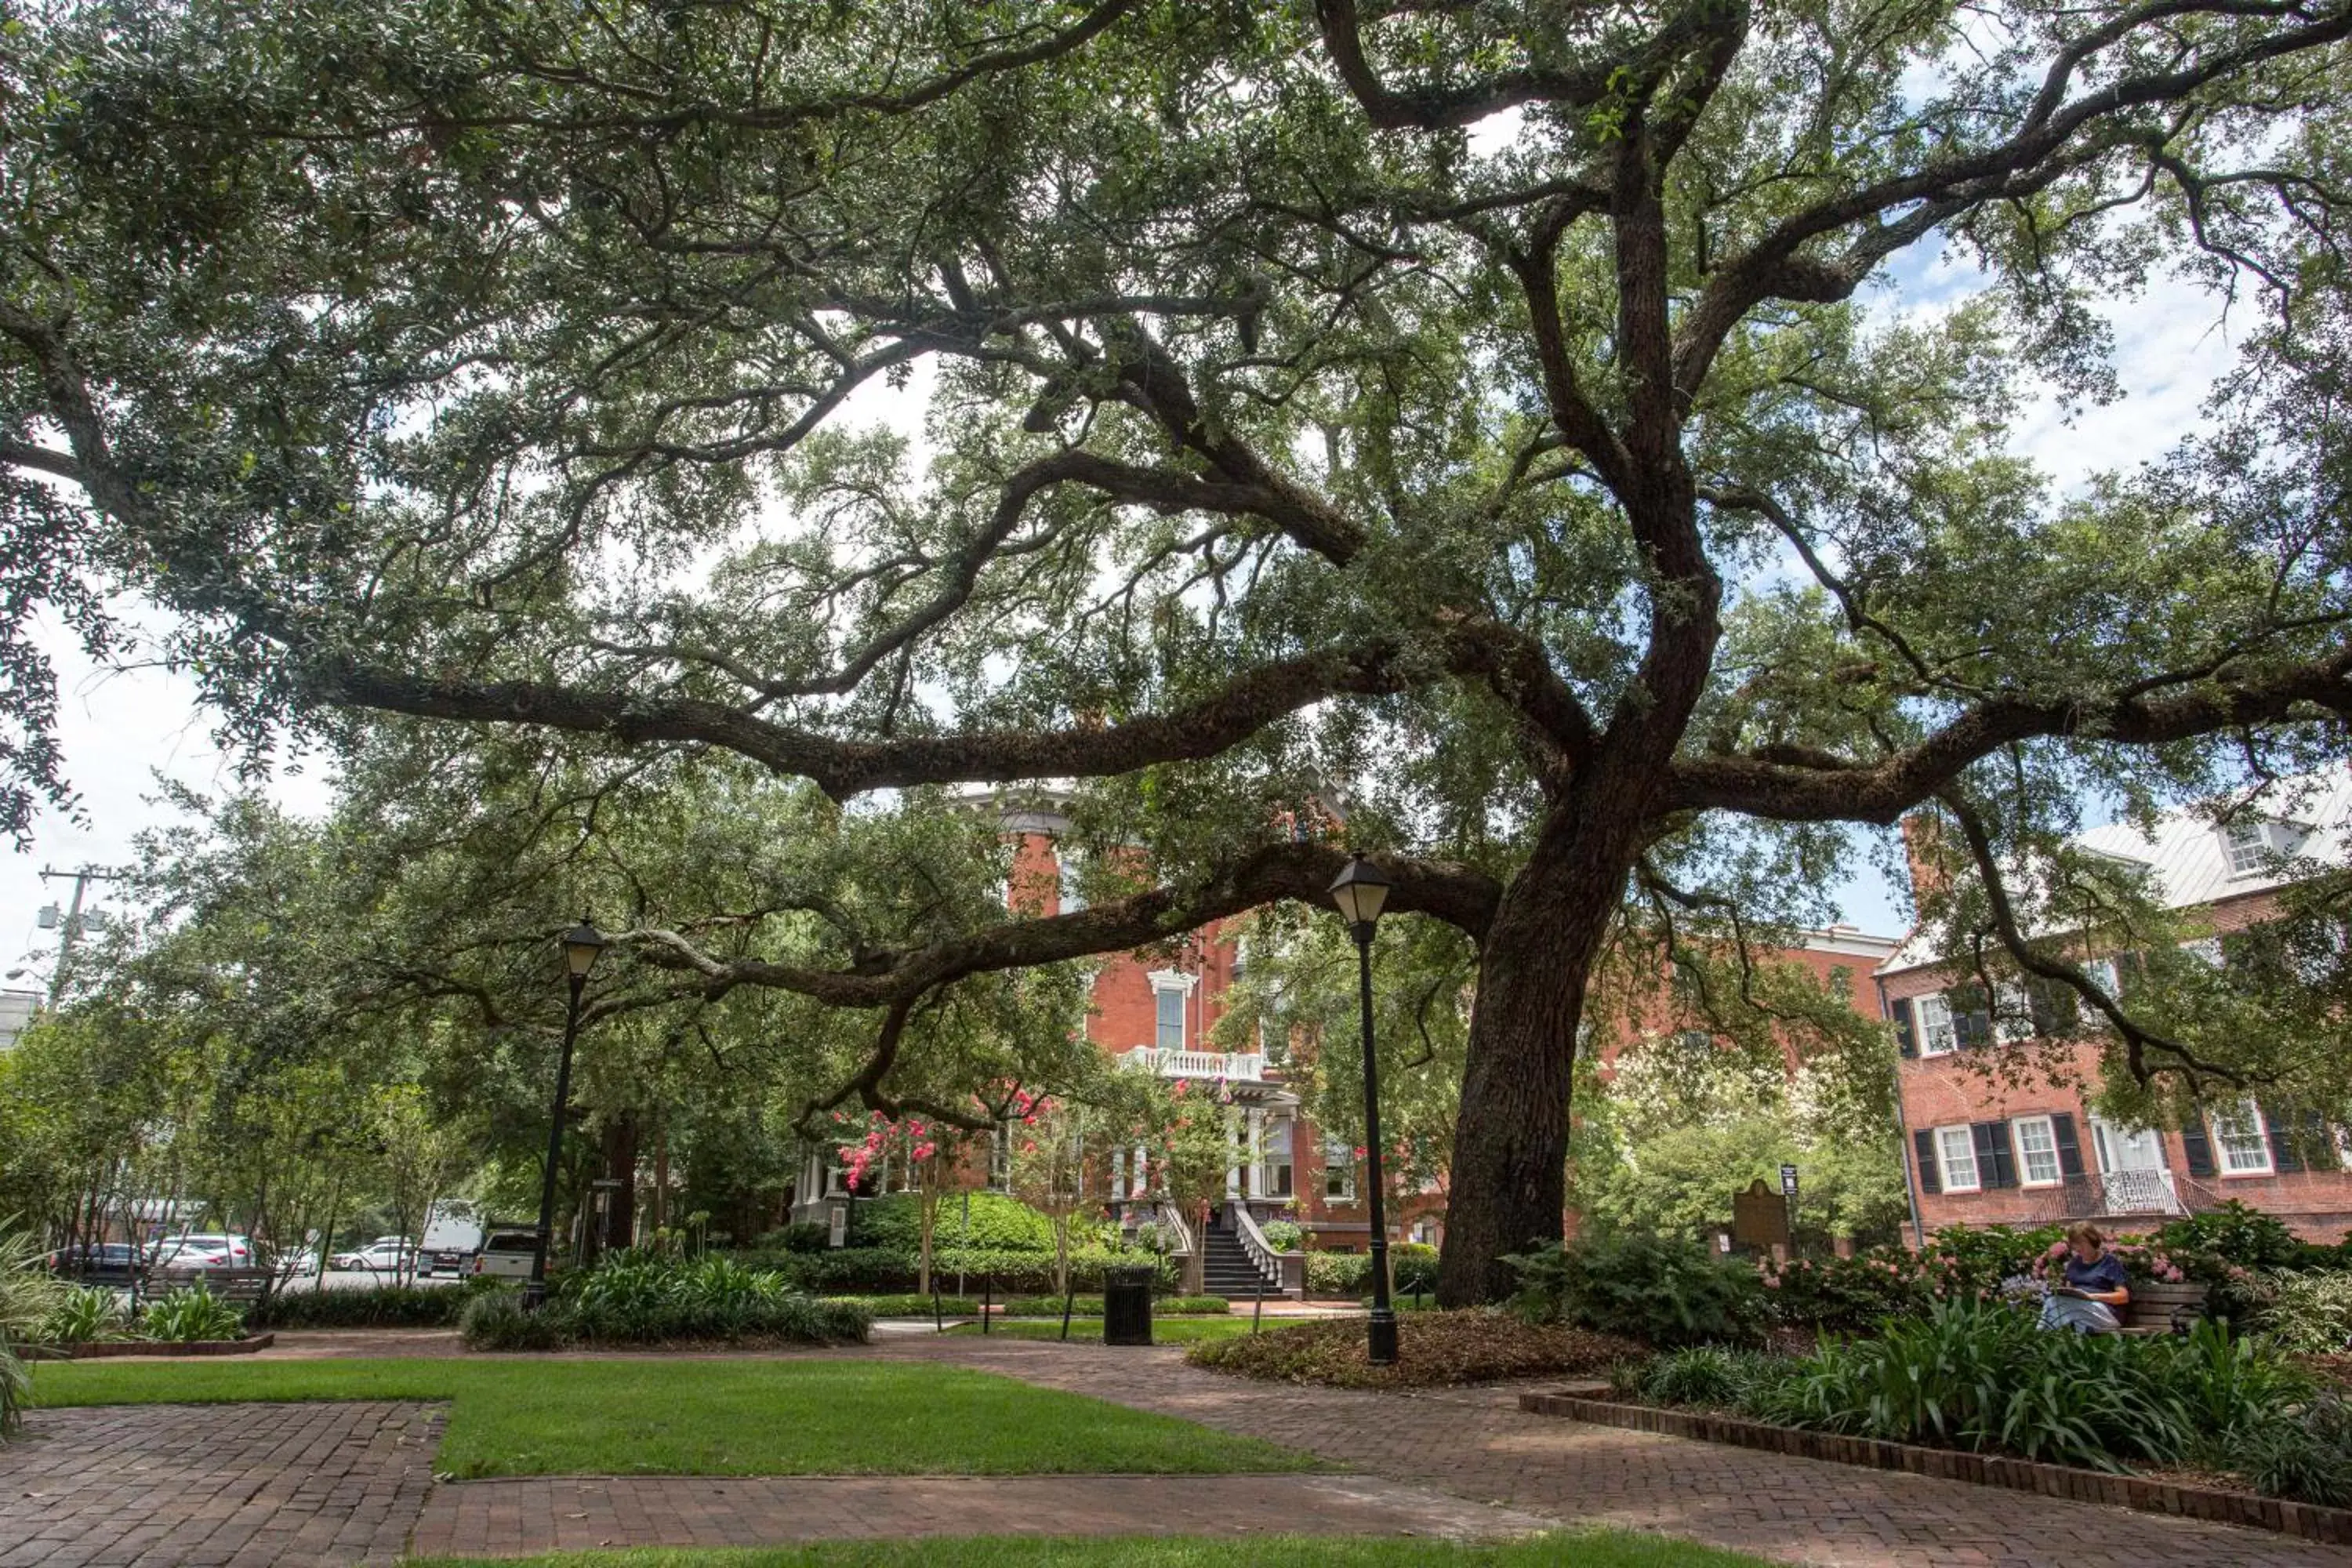 Property building, Garden in Kehoe House, Historic Inns of Savannah Collection